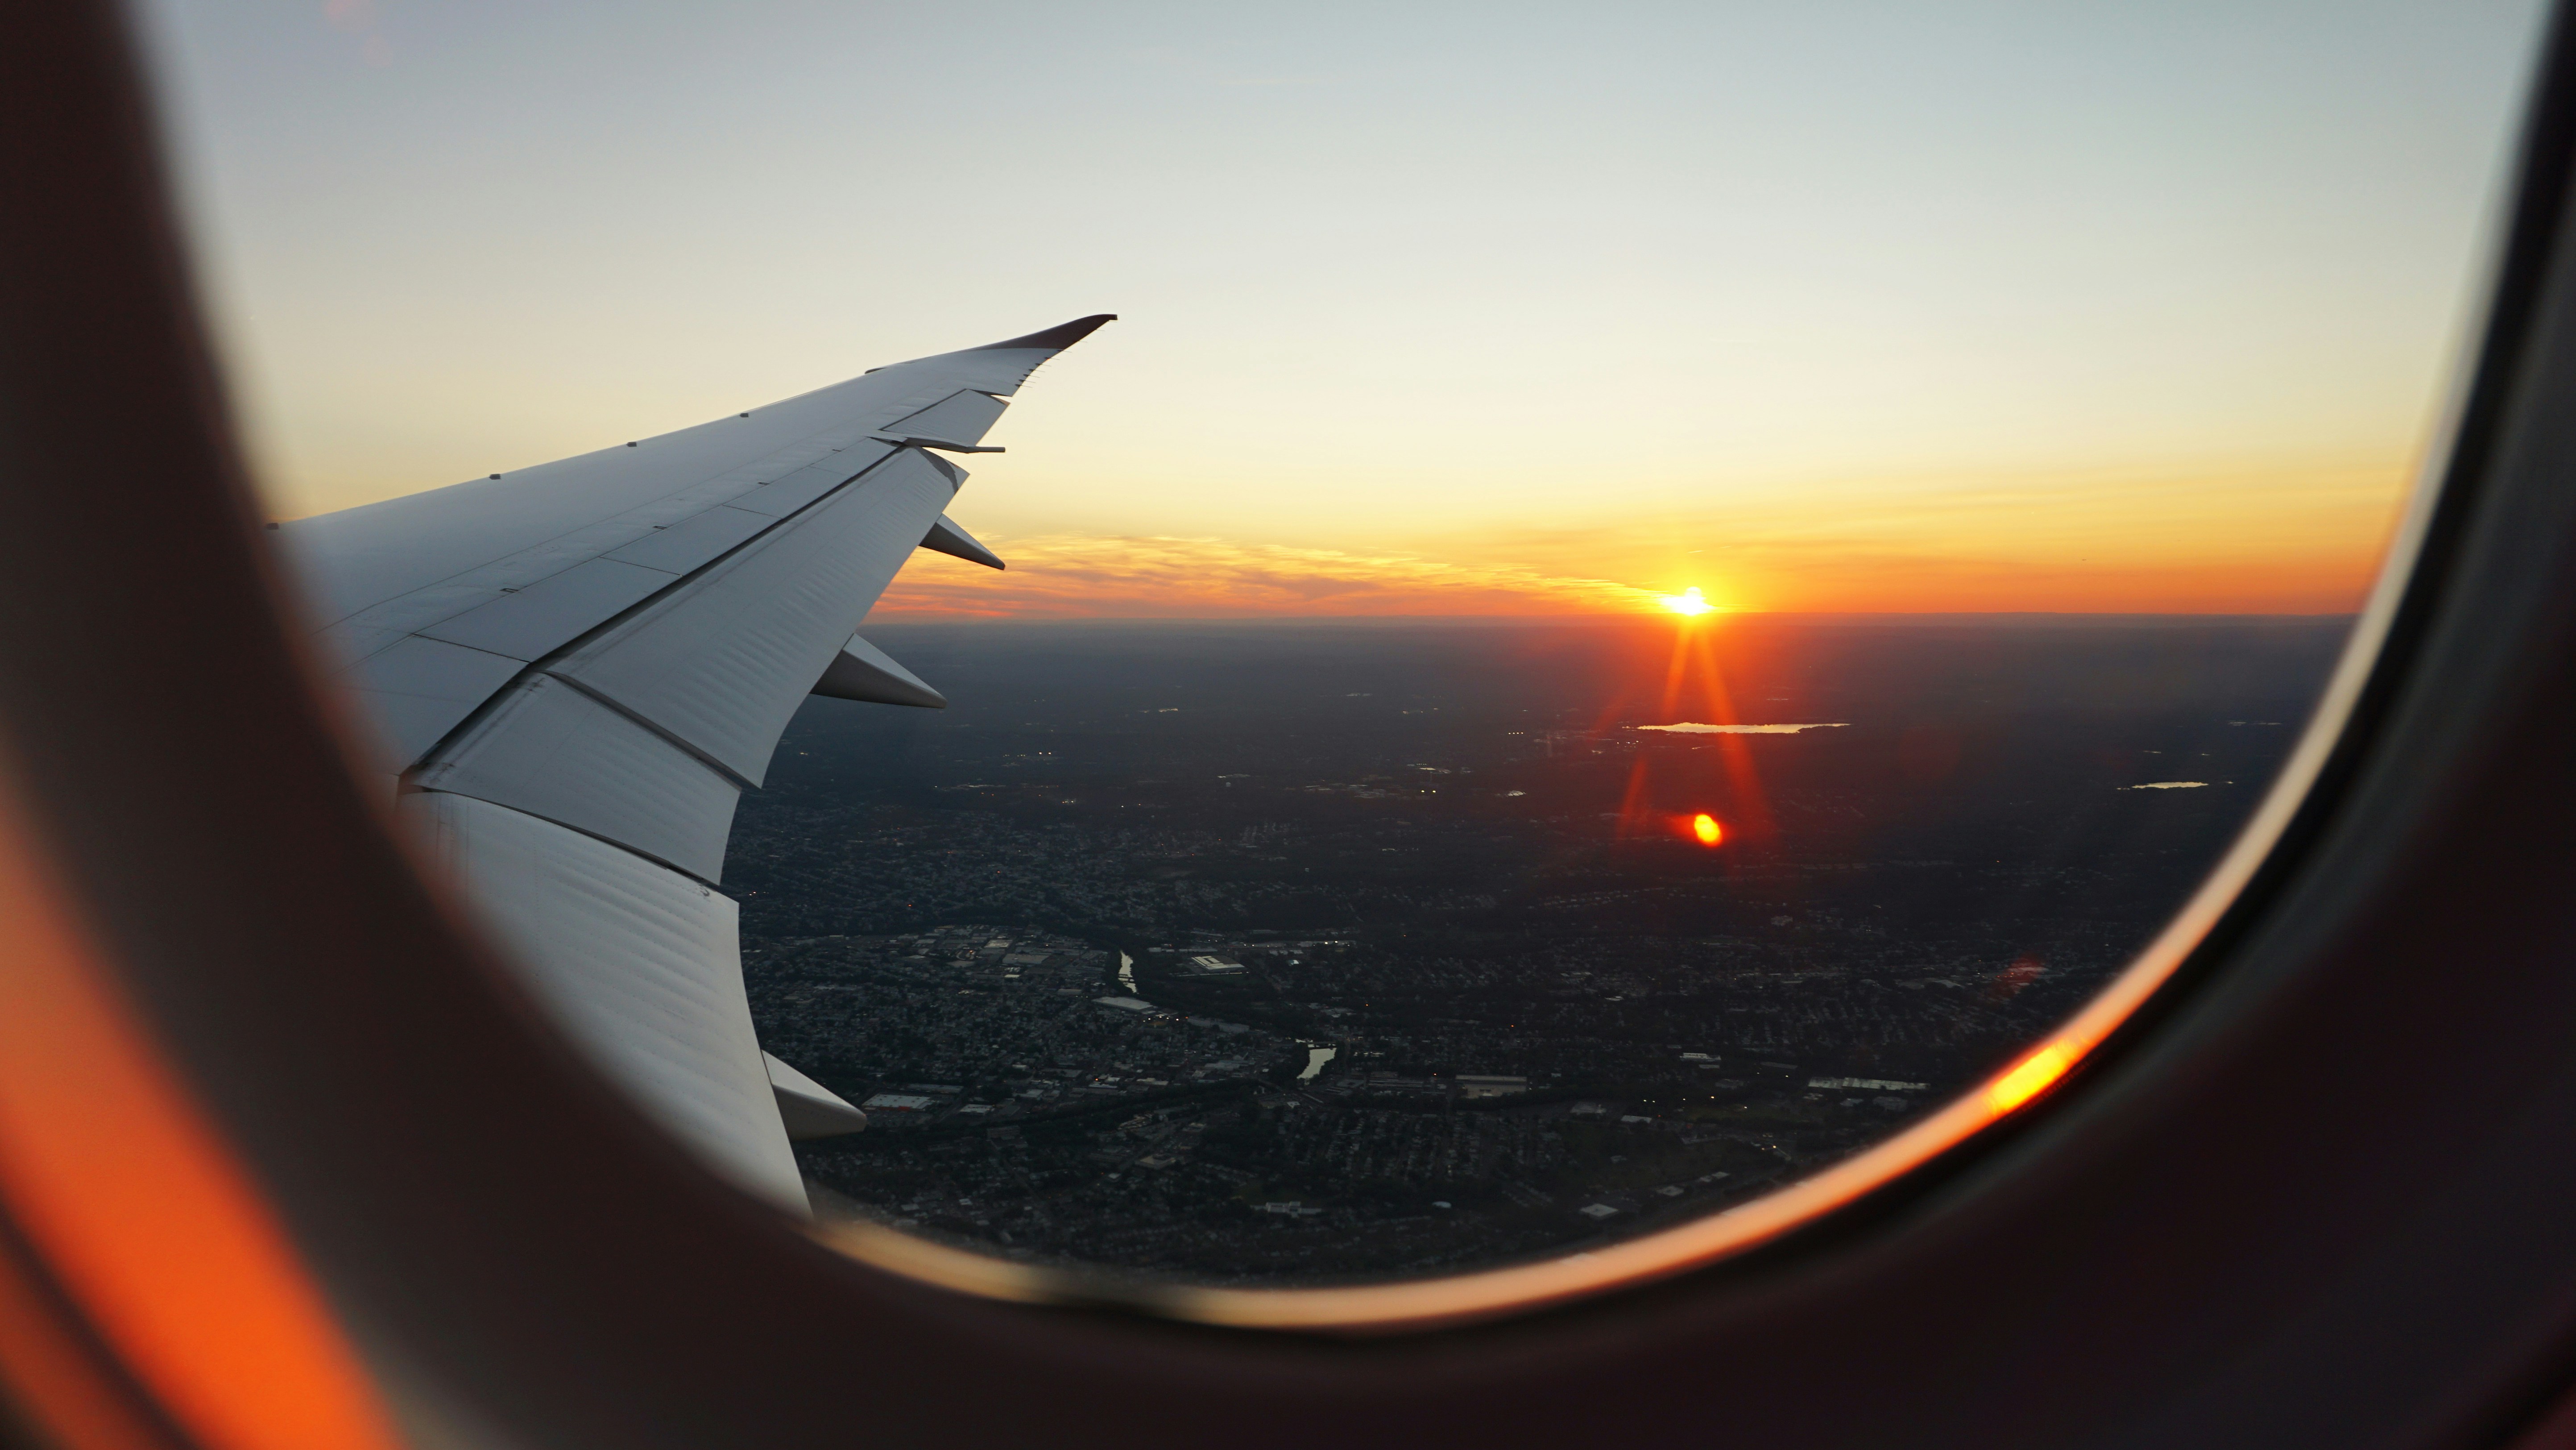 View from an airplane window during sunset, with the airplane wing visible and a landscape below with scattered lights. The sky is painted with warm hues of orange, pink, and purple as the sun sets, reflecting on a distant body of water.